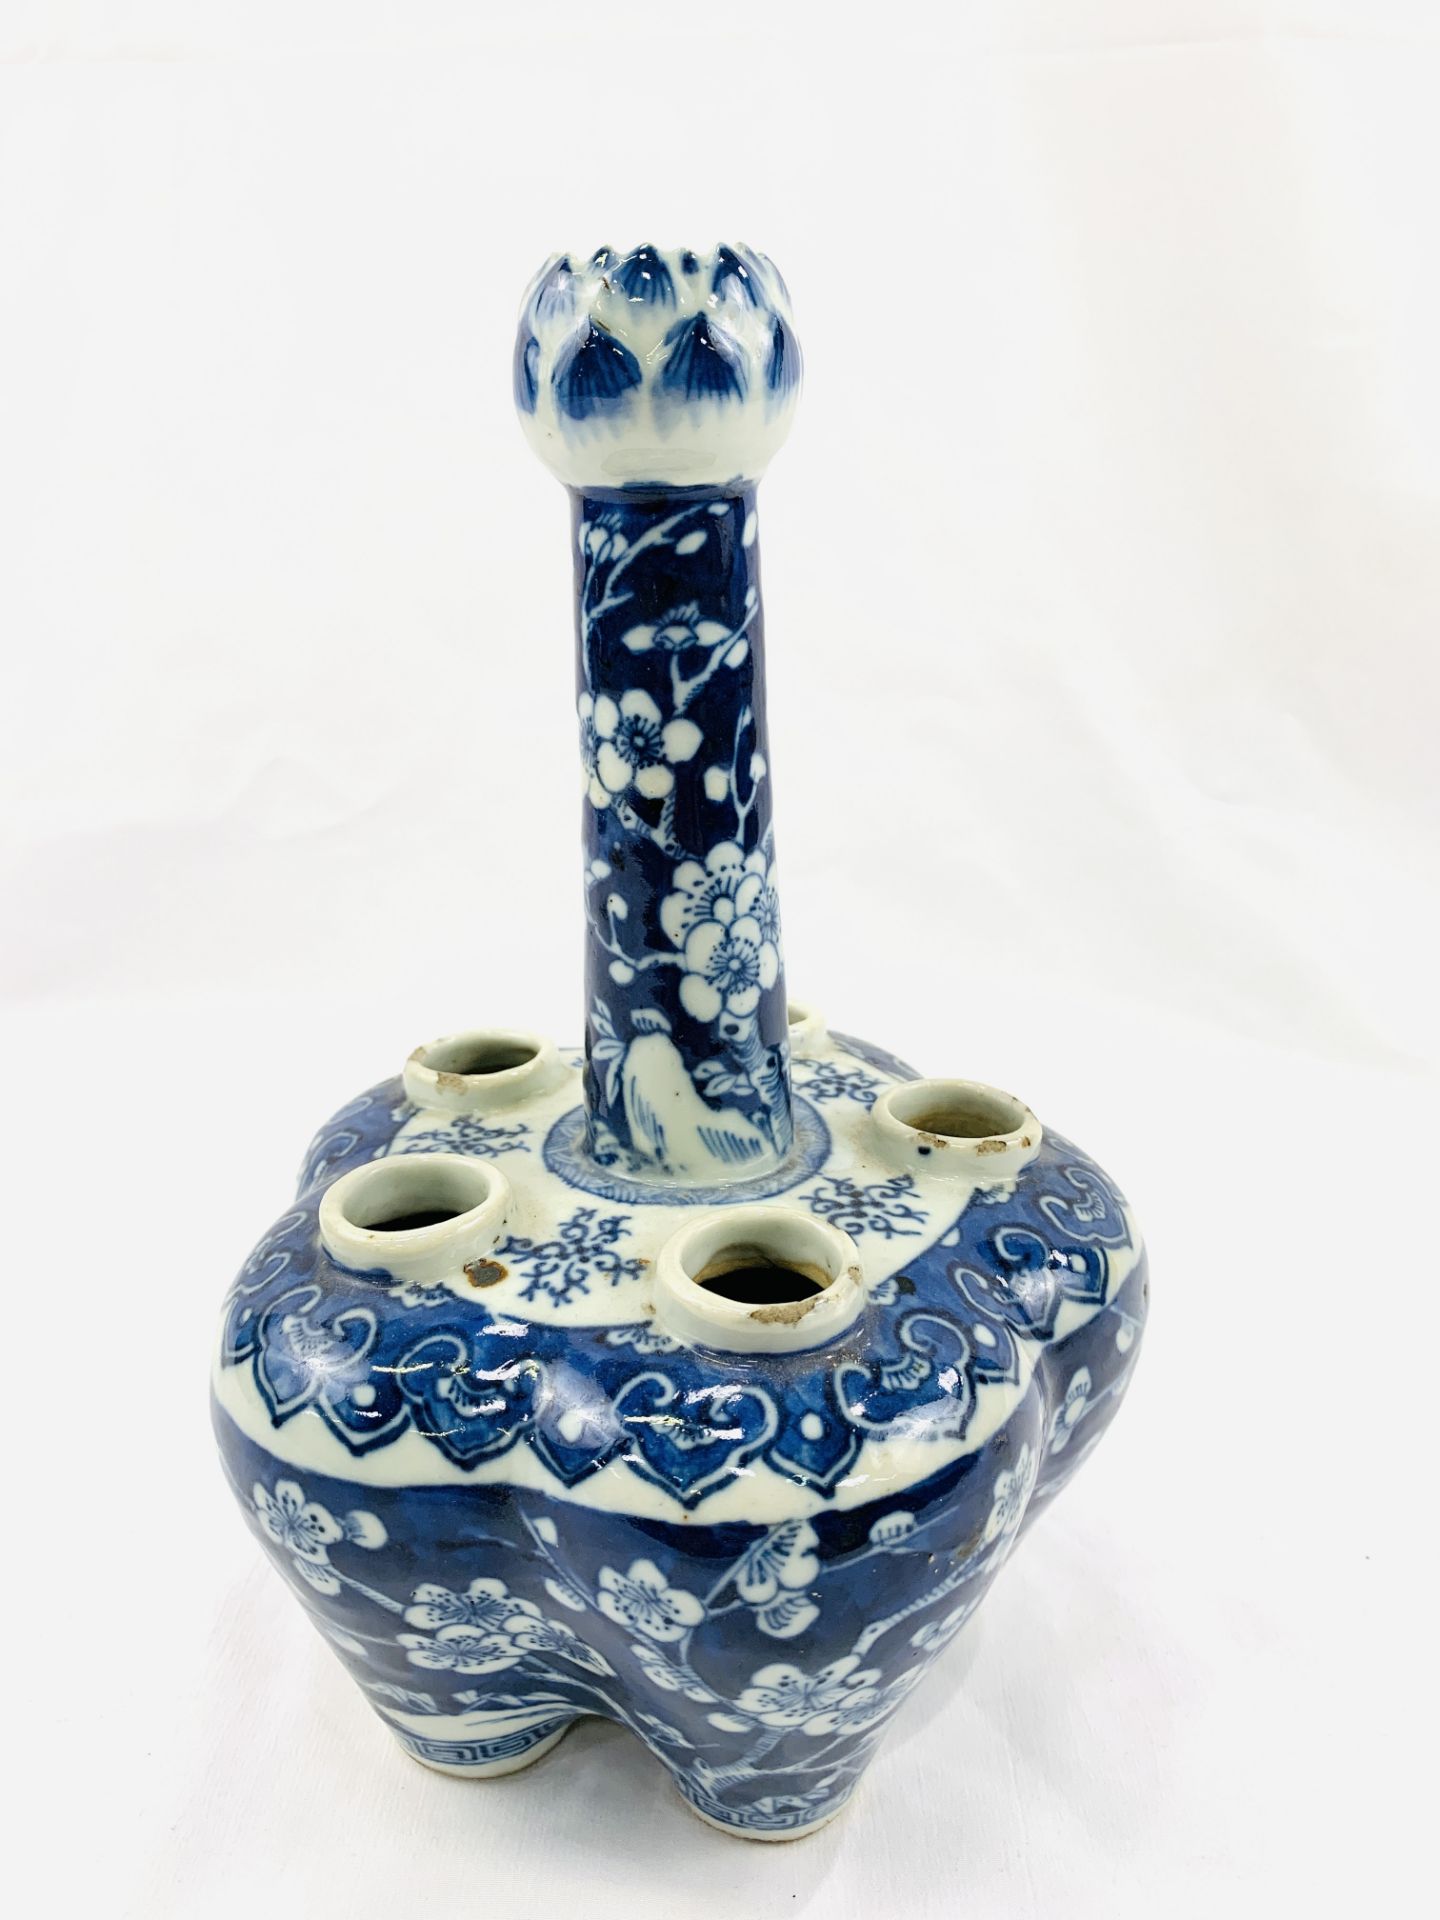 19th Century blue and white Chinese tulip vase with lobed body and five apertures - Image 4 of 5